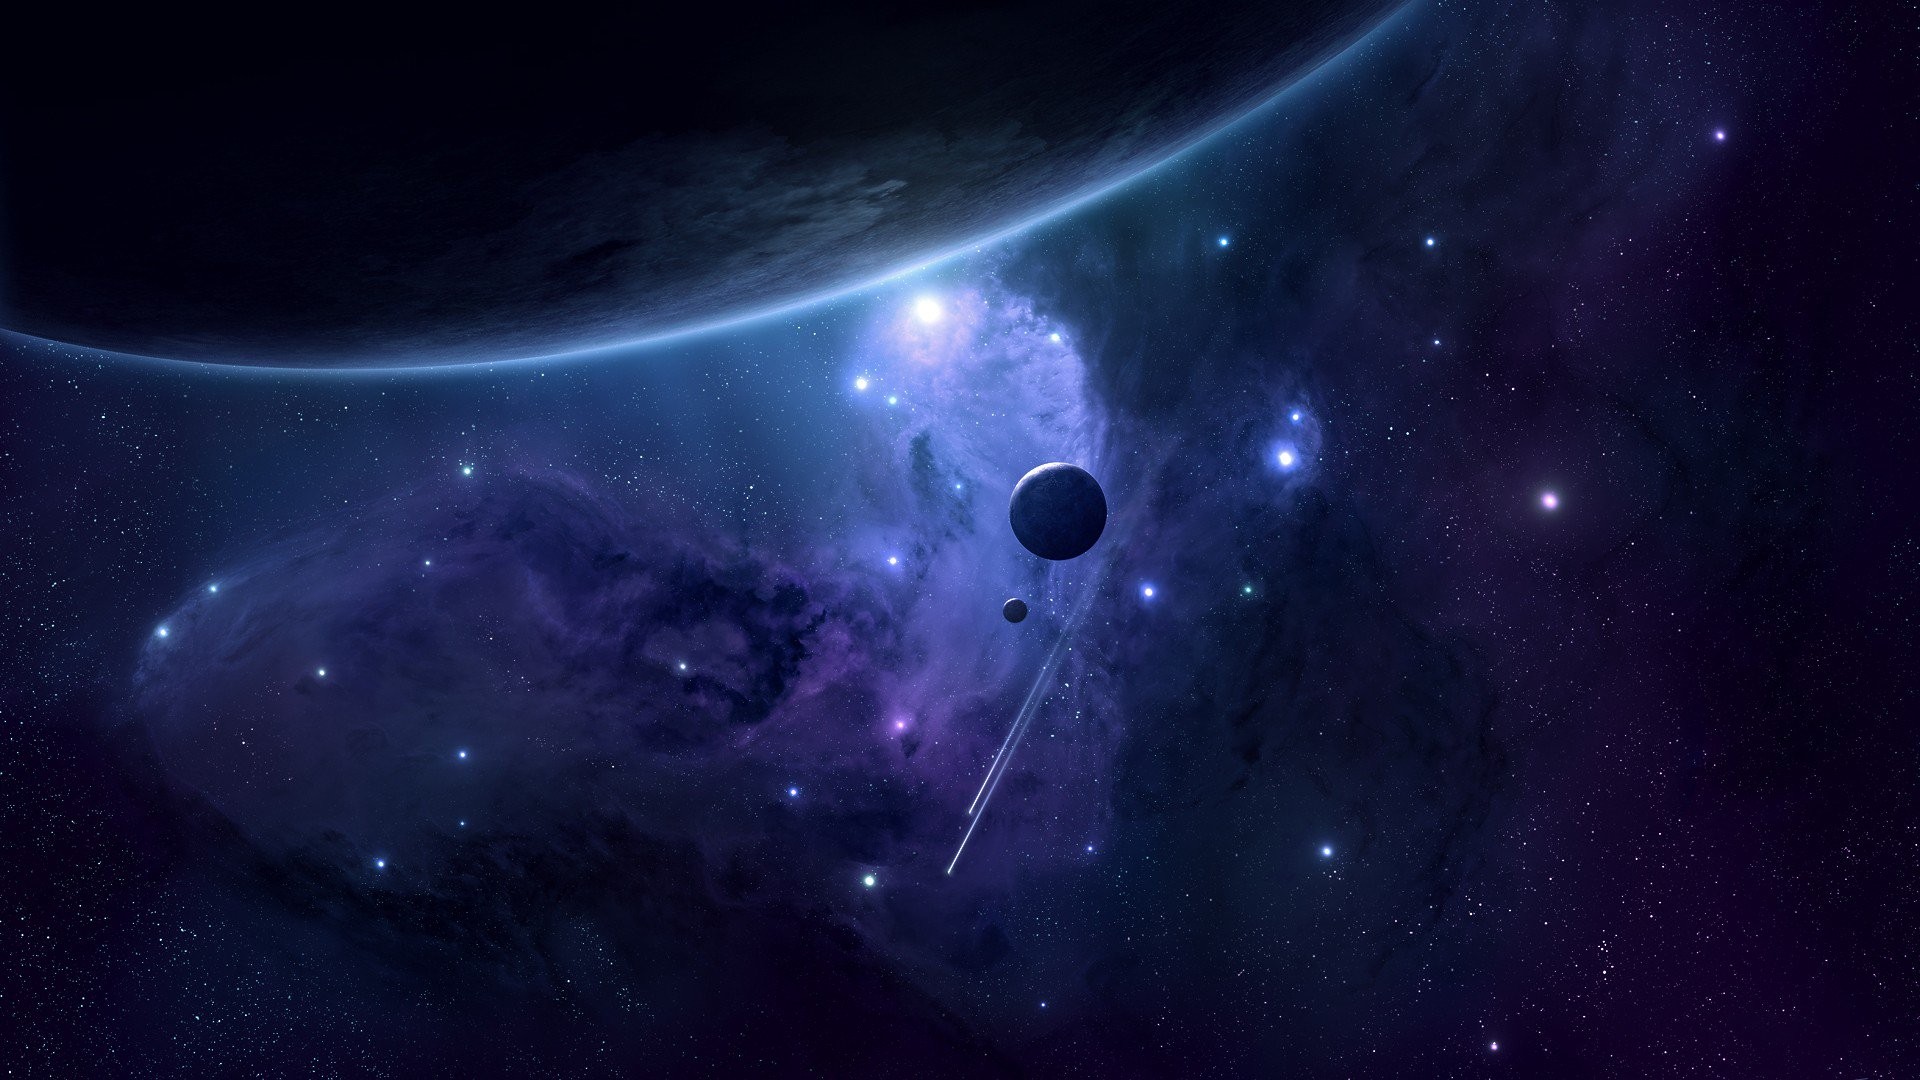 Cosmic wallpaper ·① Download free awesome HD wallpapers for desktop ...